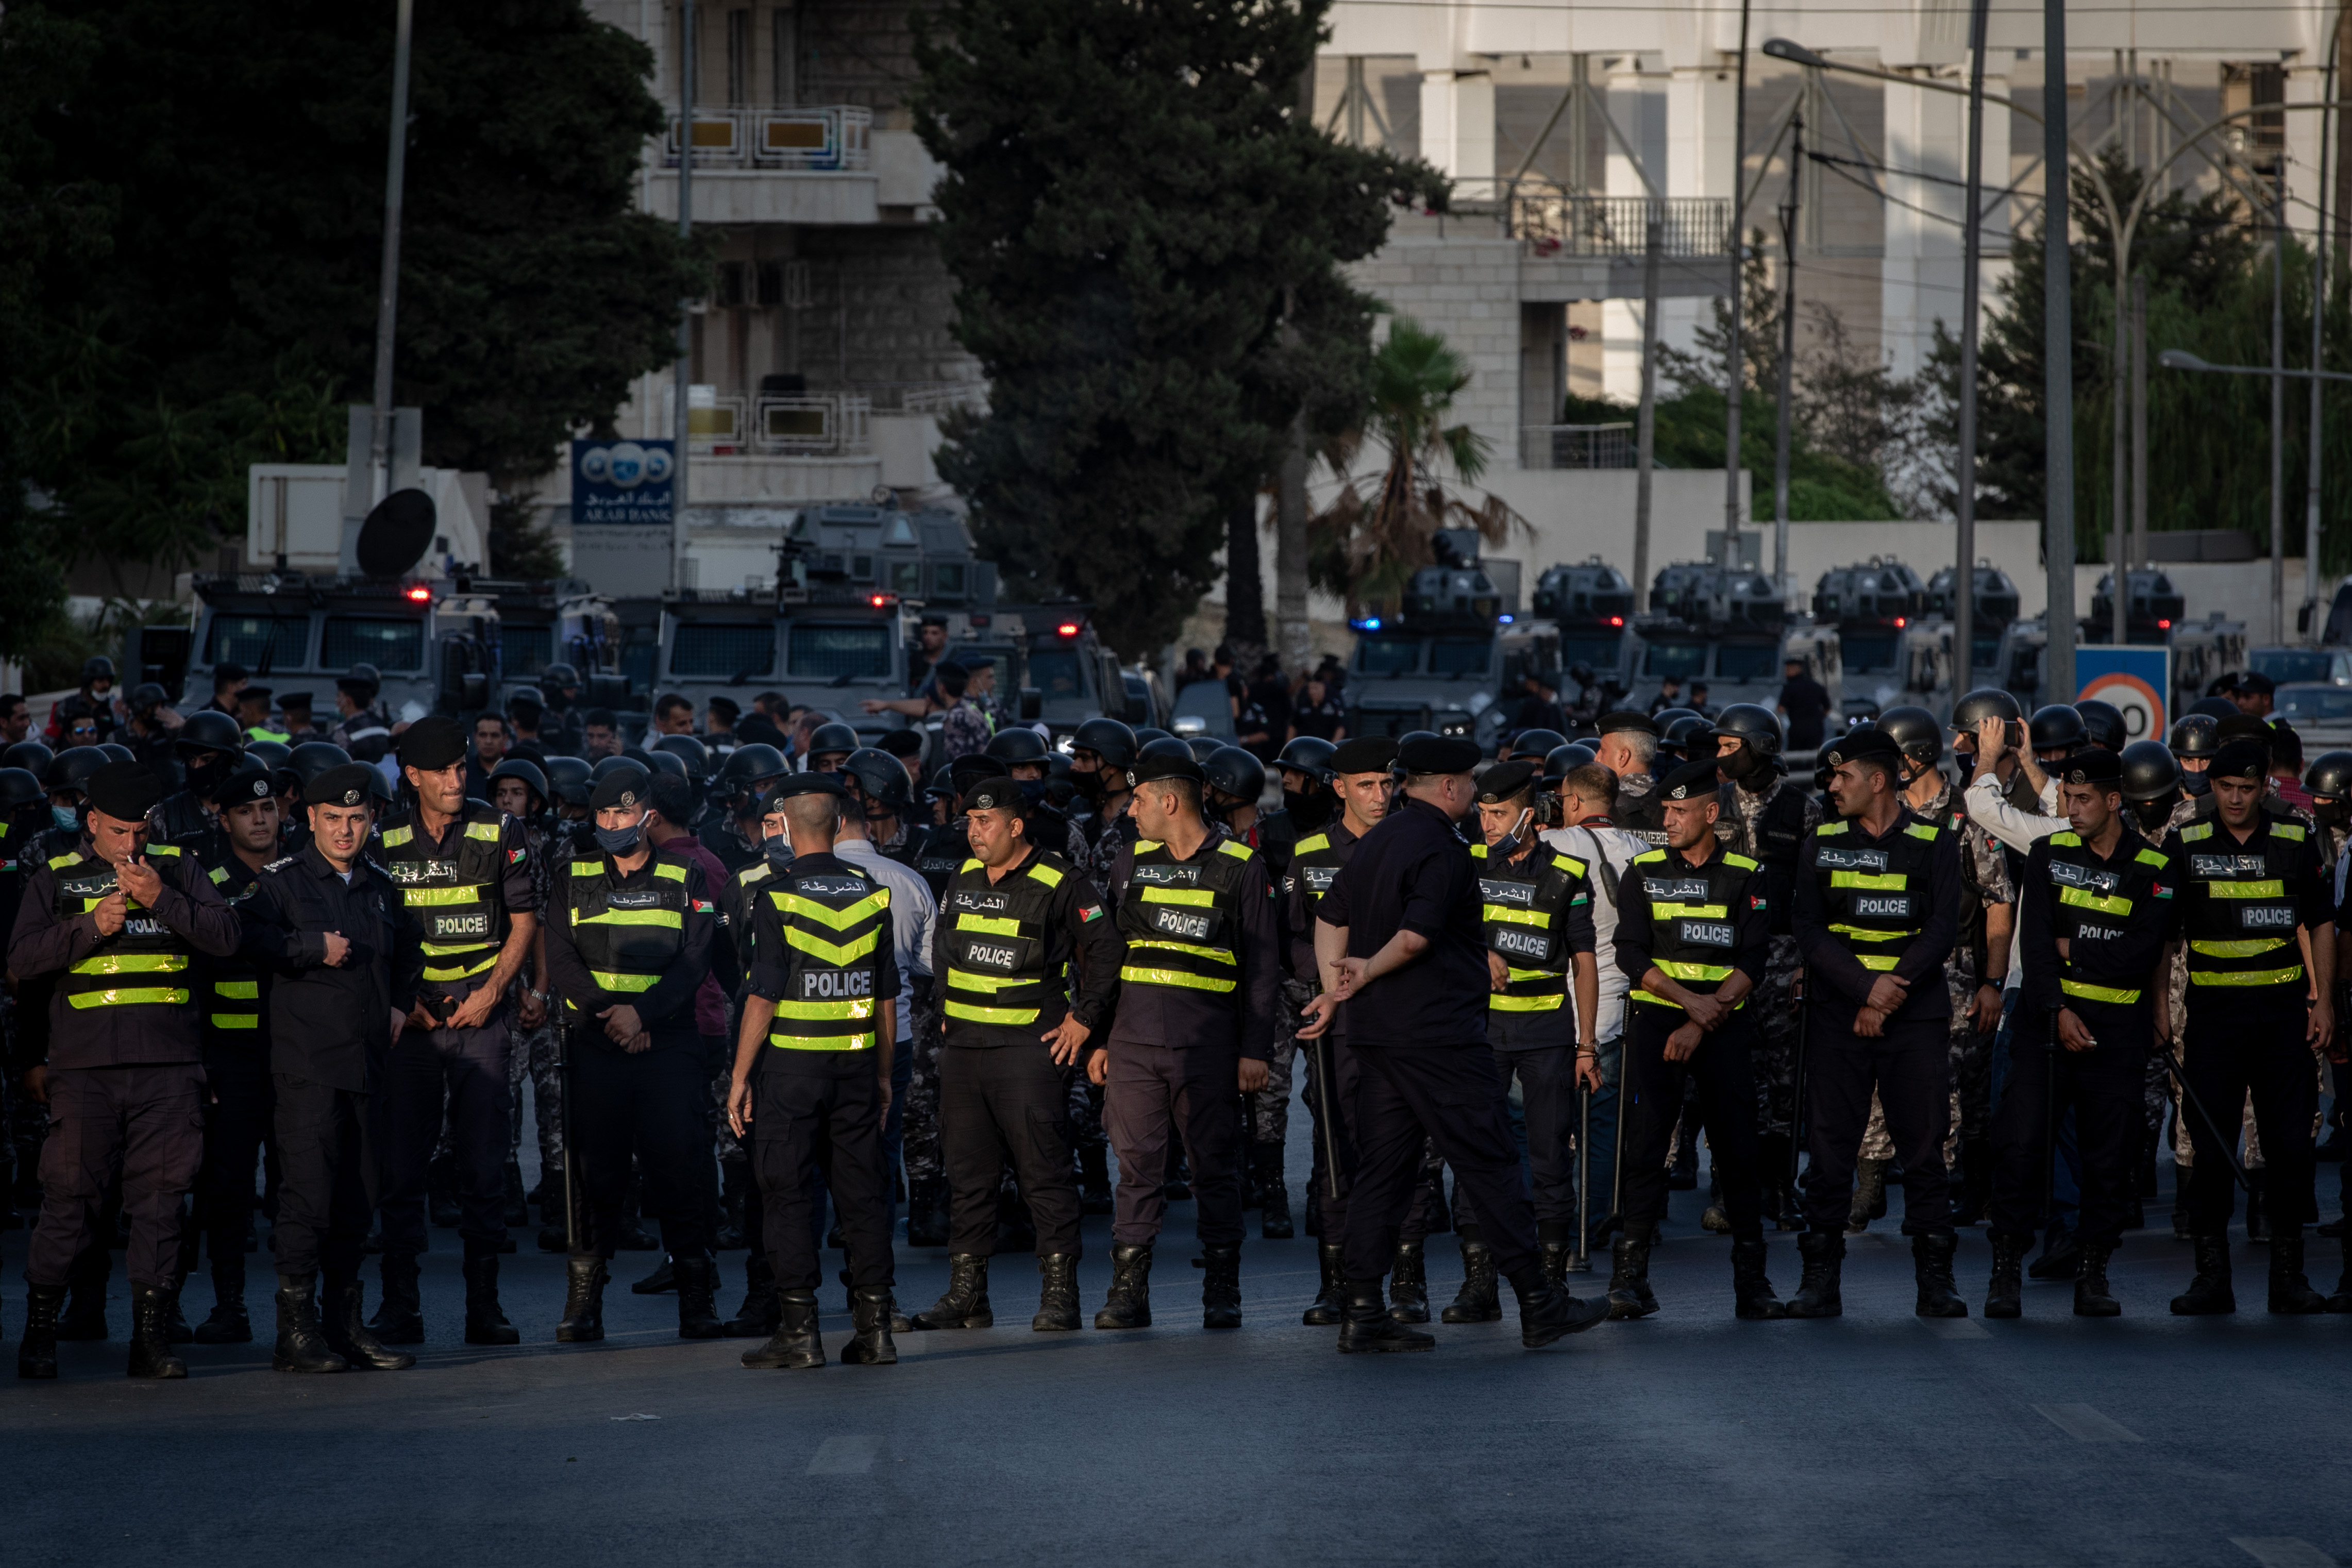 Security forces prevent protesters from making their way to government buildings in Amman's 4th circle, during a demonstration held near the 5th circle on 29.07.2020 to protest the decision to dissolve the teacher's syndicate and arrest its leaders (photo: Sherbel Dissi)